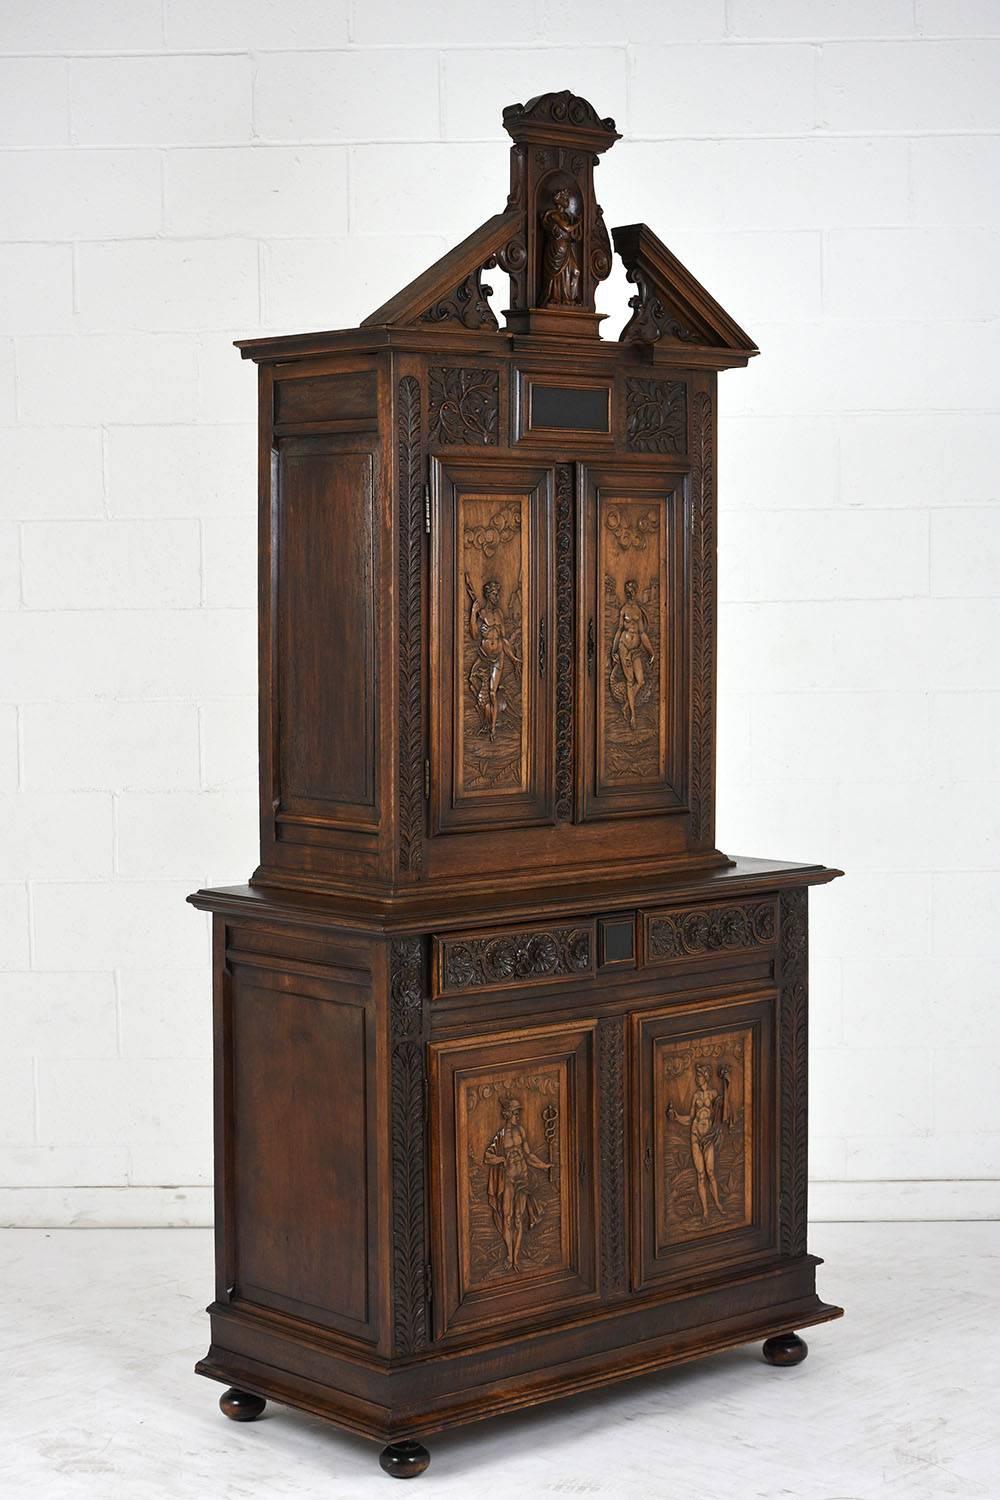 This 1820s French Renaissance style sideboard is made of walnut wood stained a rich walnut color with a polished finish. The ornately carved sideboard is adorned with floral, leave, and figurative carvings of mythical gods and goddesses. At the top